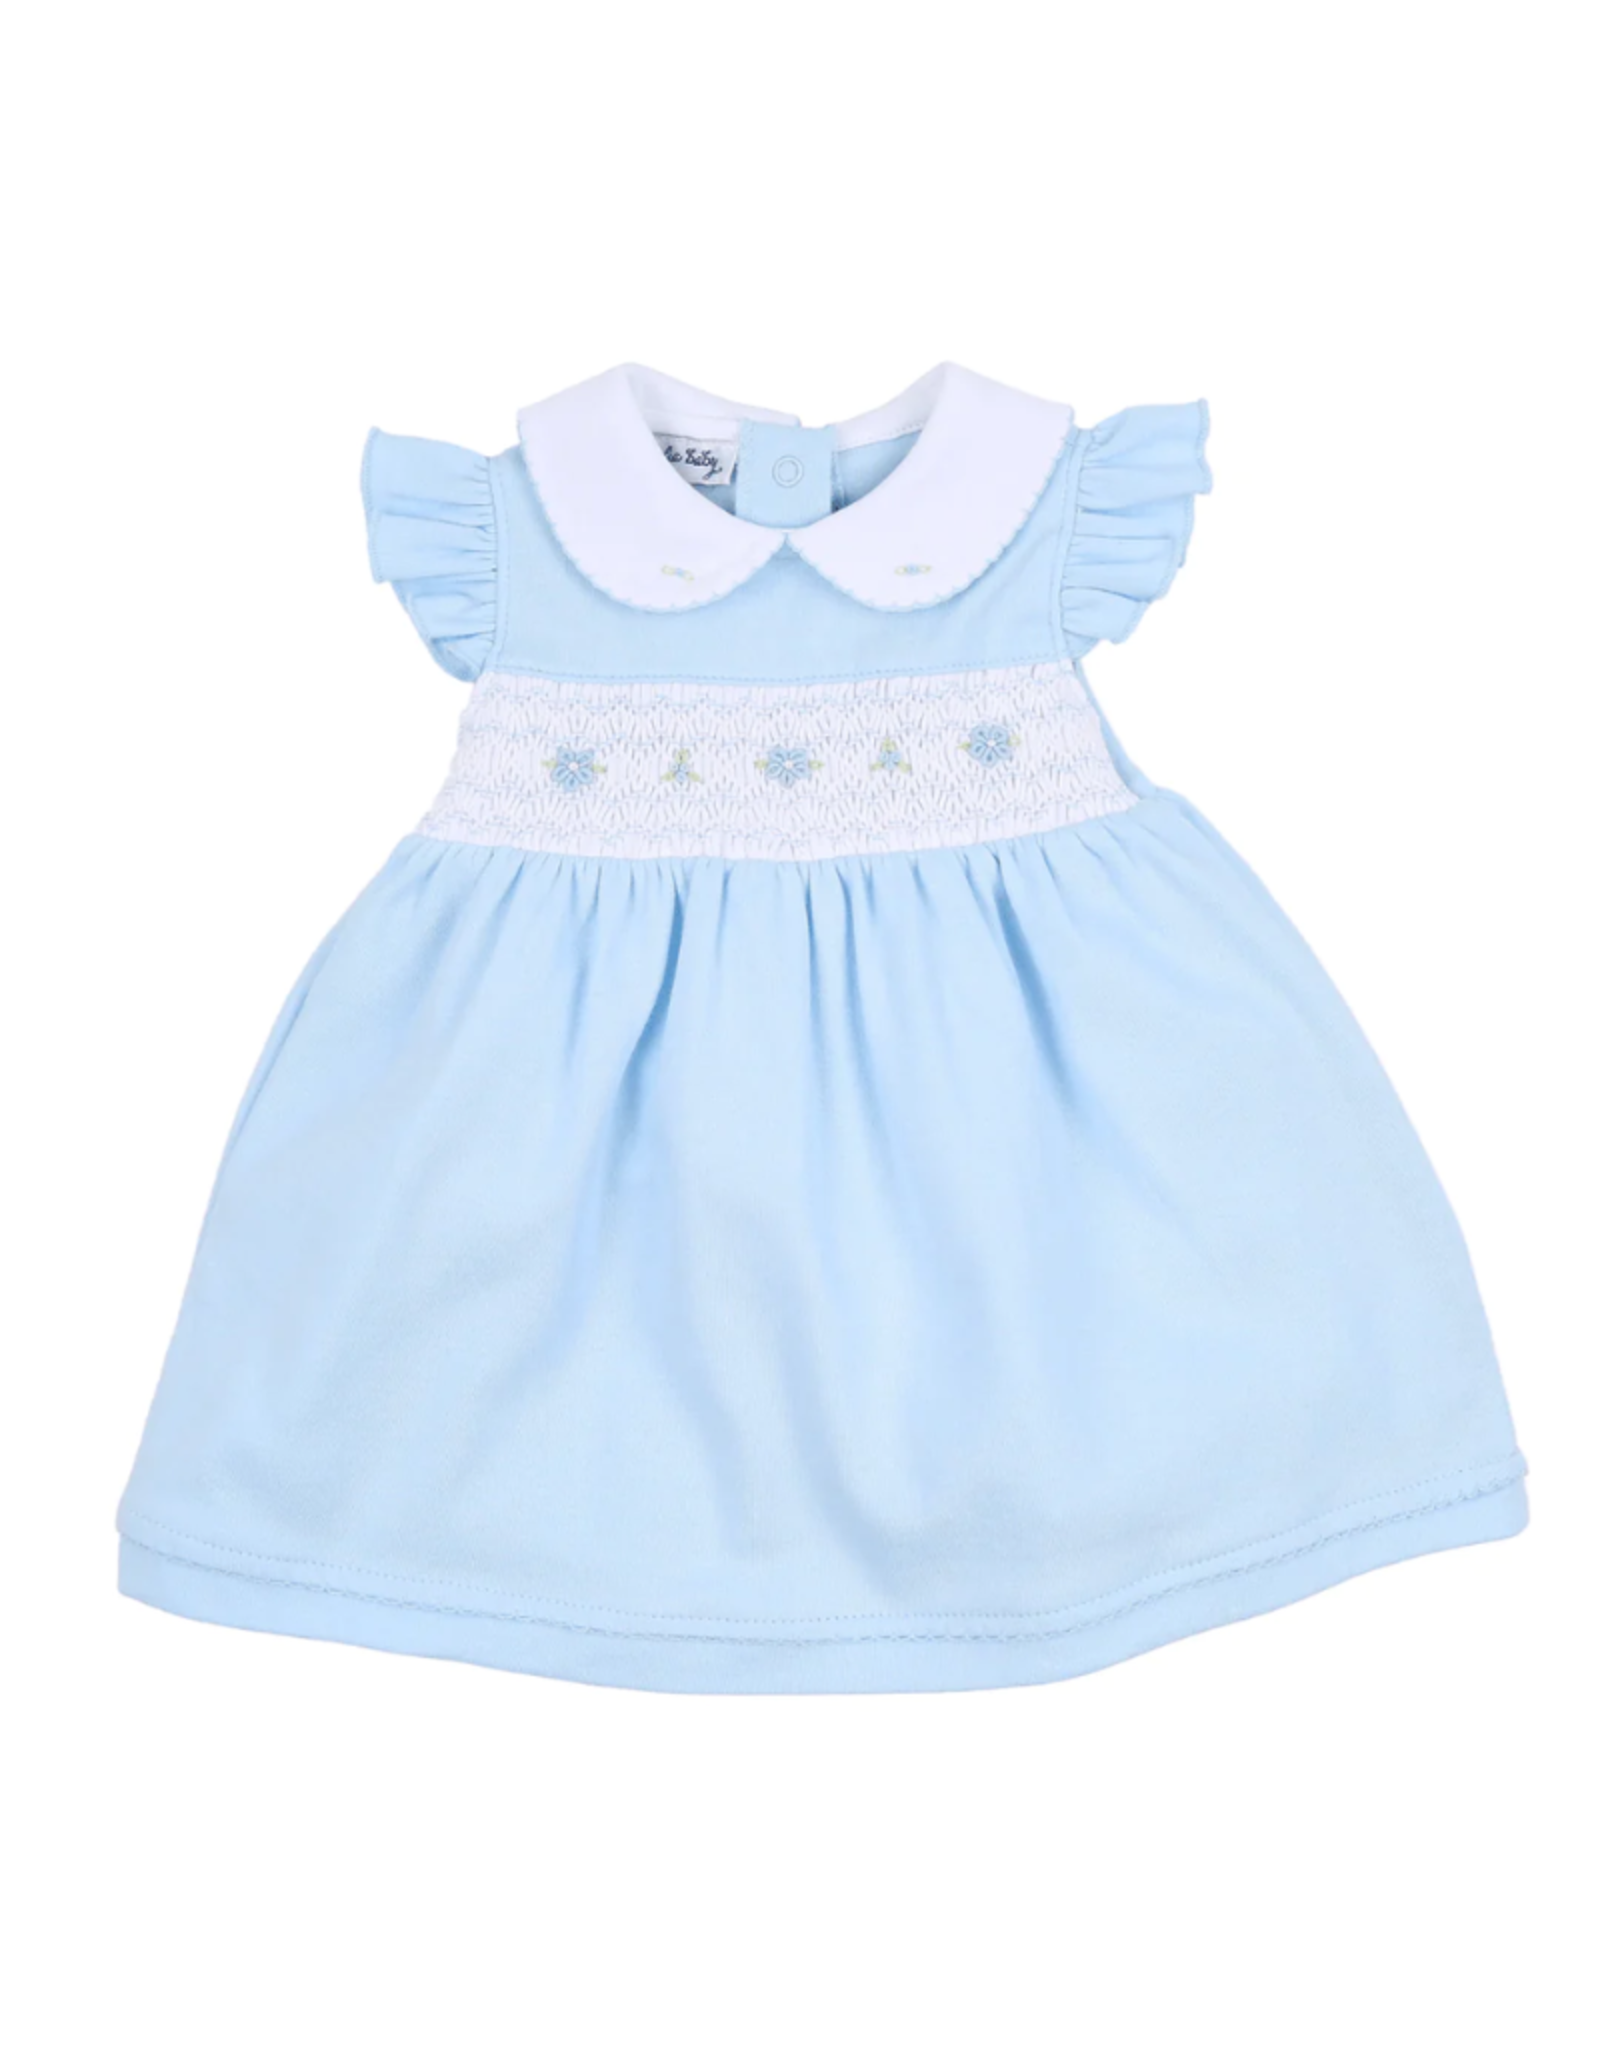 Magnolia Baby Hailey And Harry Smock Collar Flutter Dress